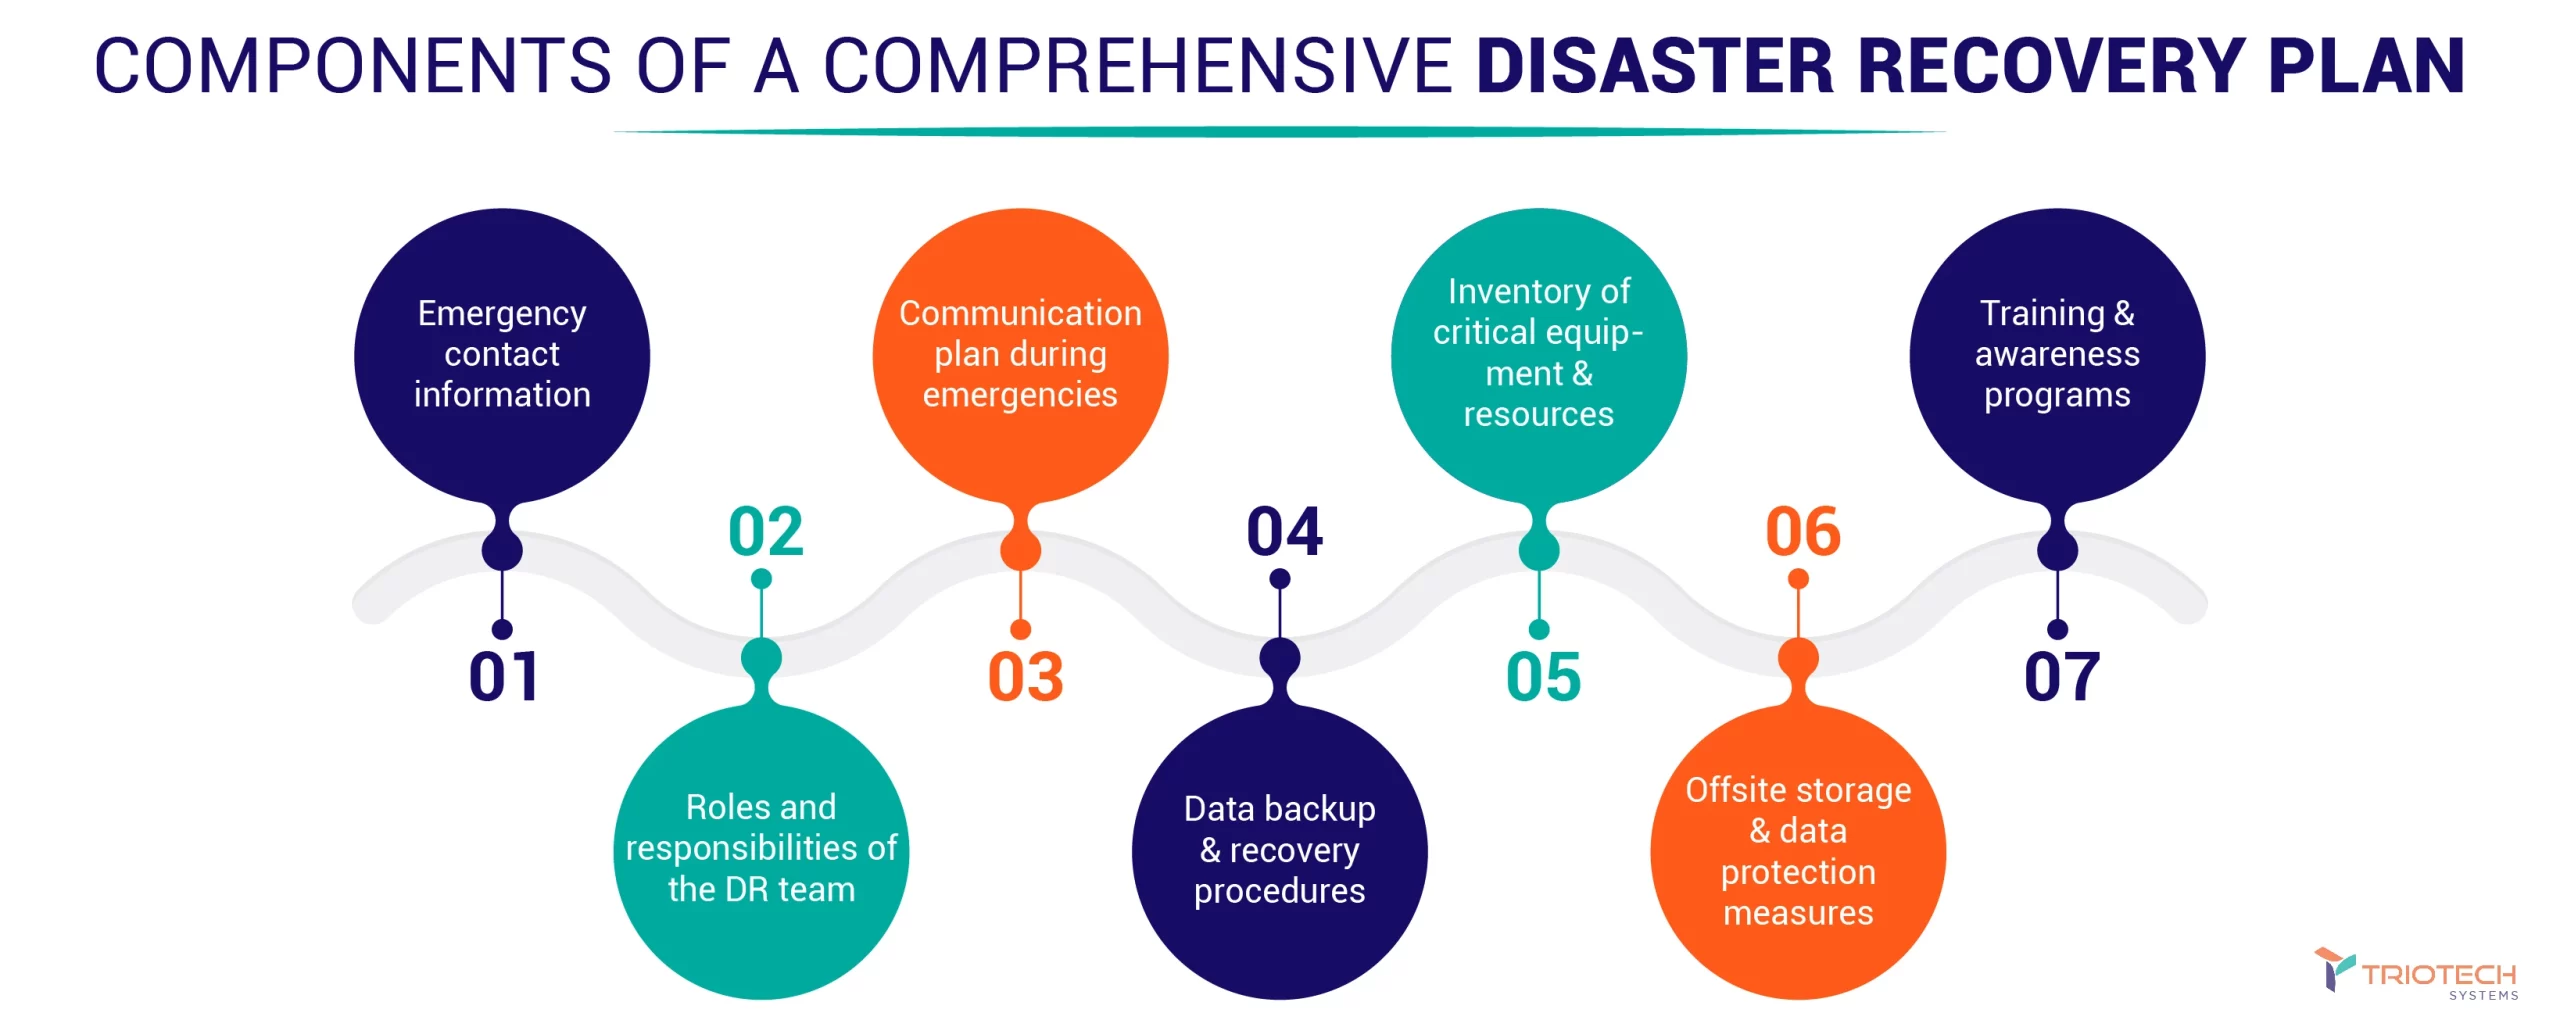 Components Of A Comprehensive Disaster Recovery Plan